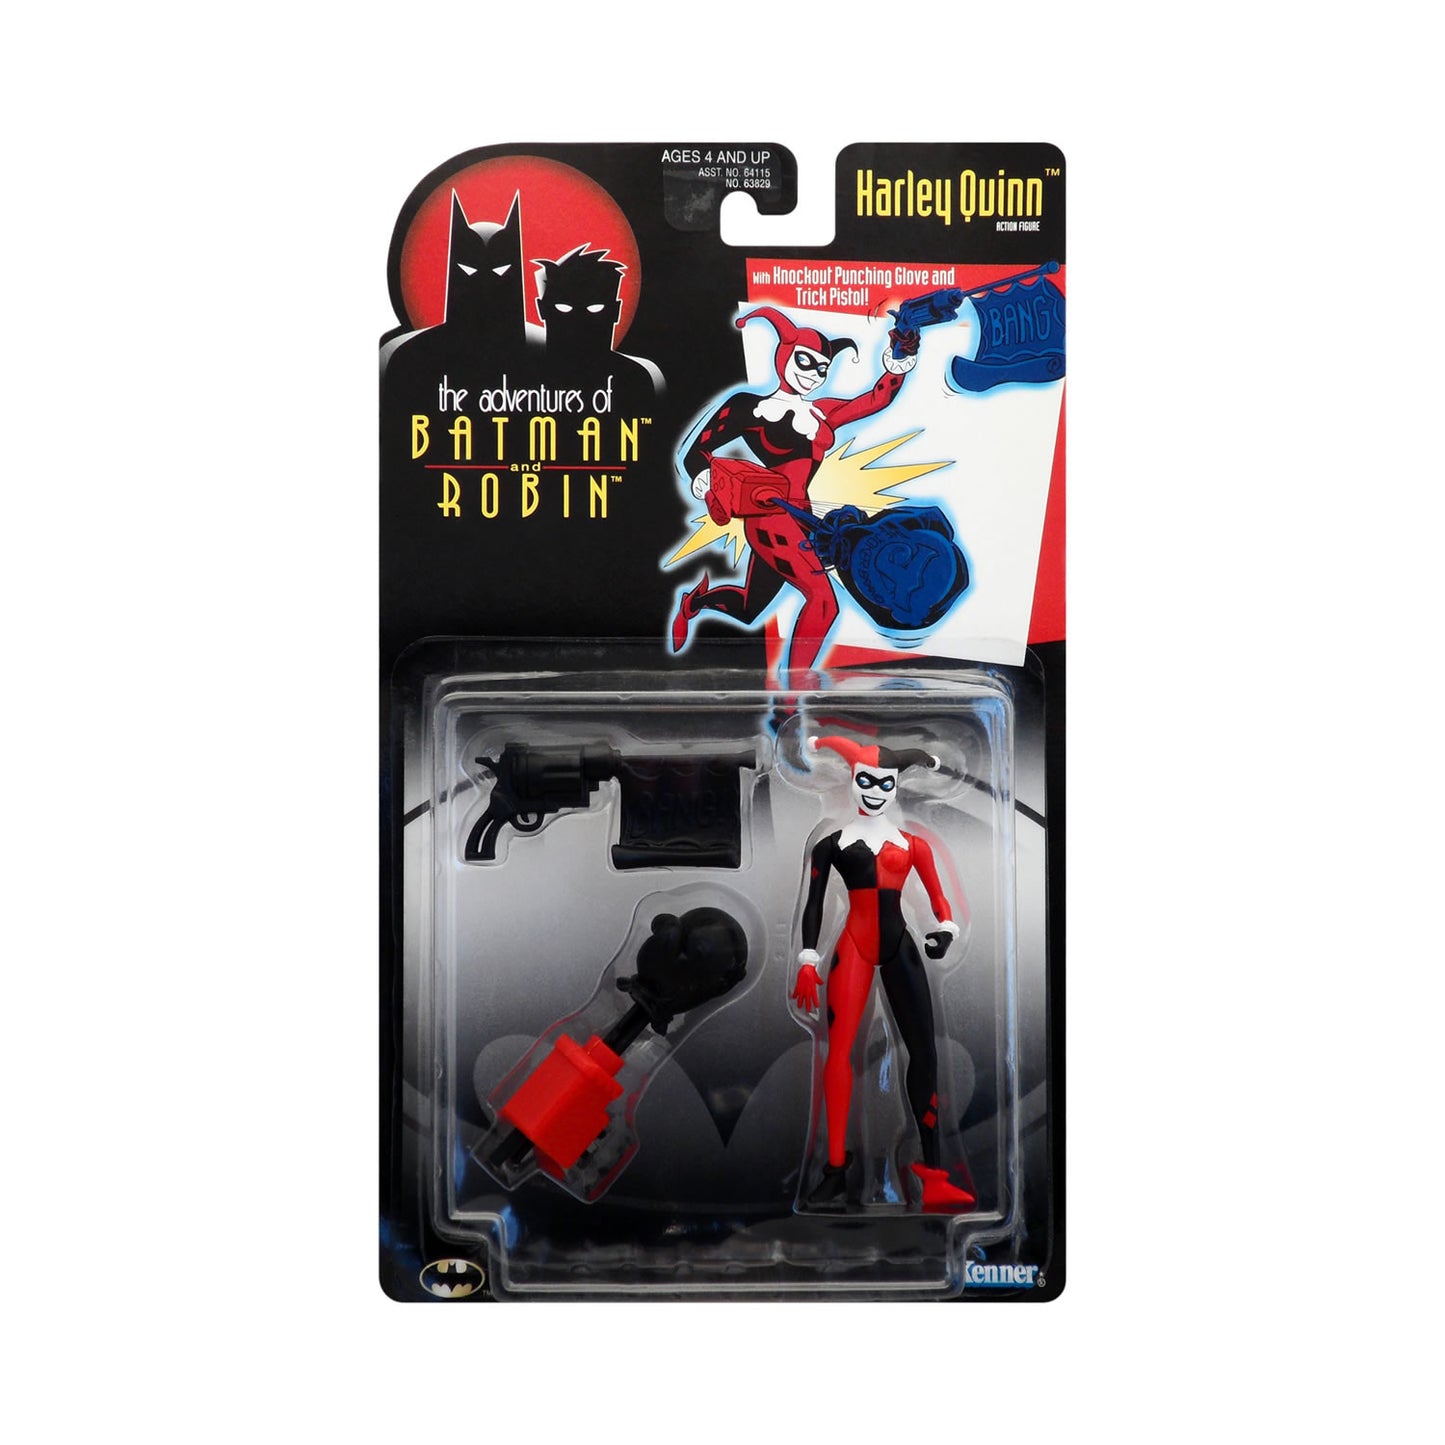 Harley Quinn Action Figure from Adventures of Batman and Robin